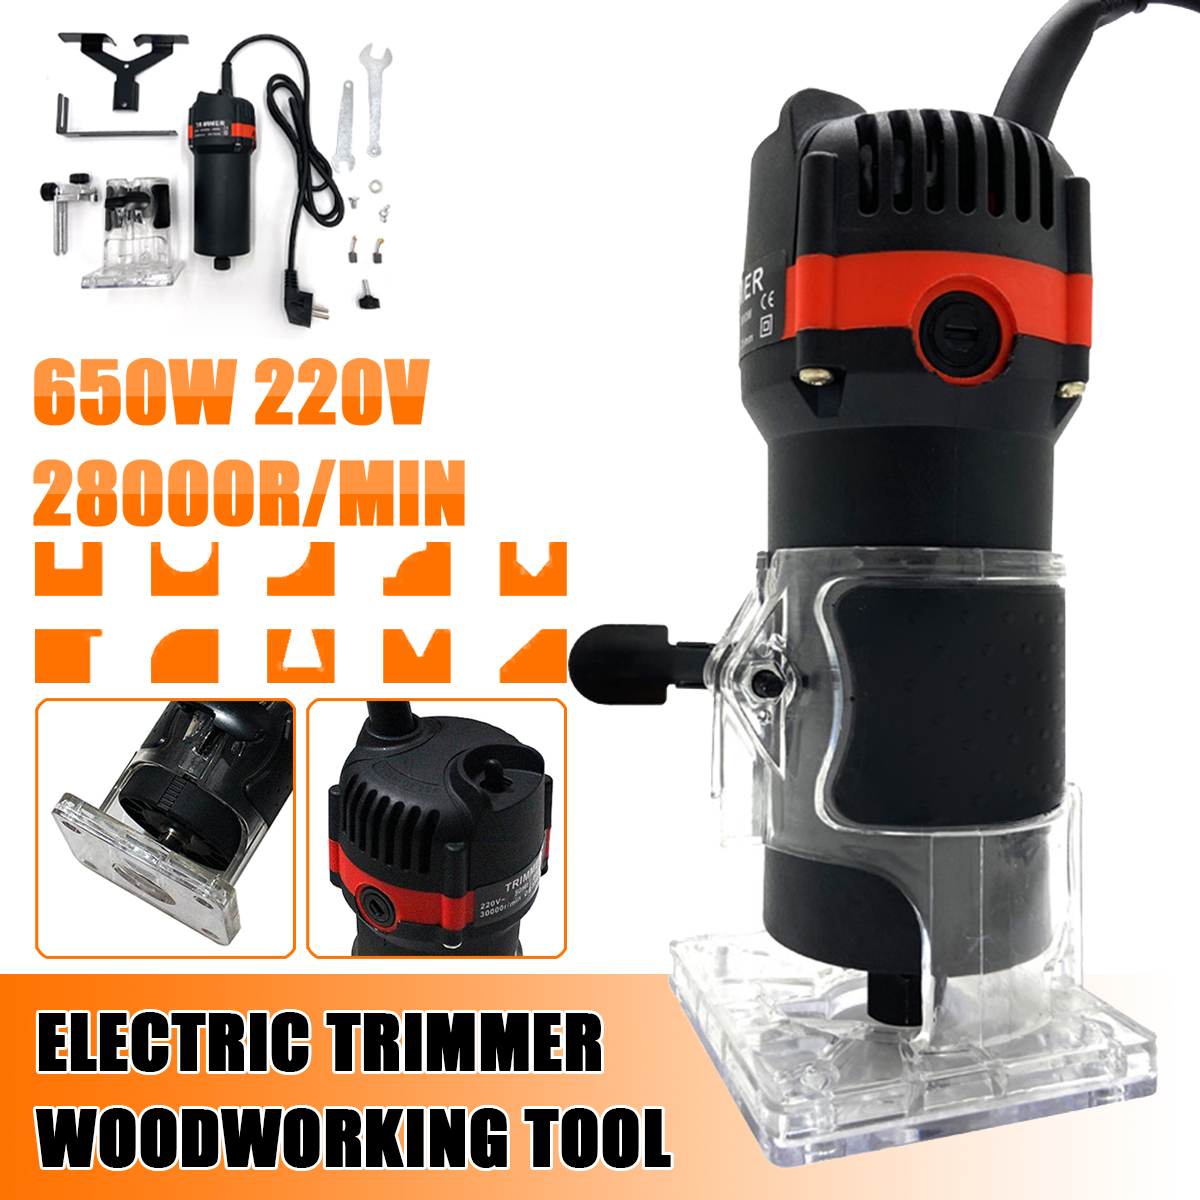 650W-33000RPM-Electric-Hand-Trimmer-Router-Wood-Carving-Machine-Woodworking-Tool-1866549-2